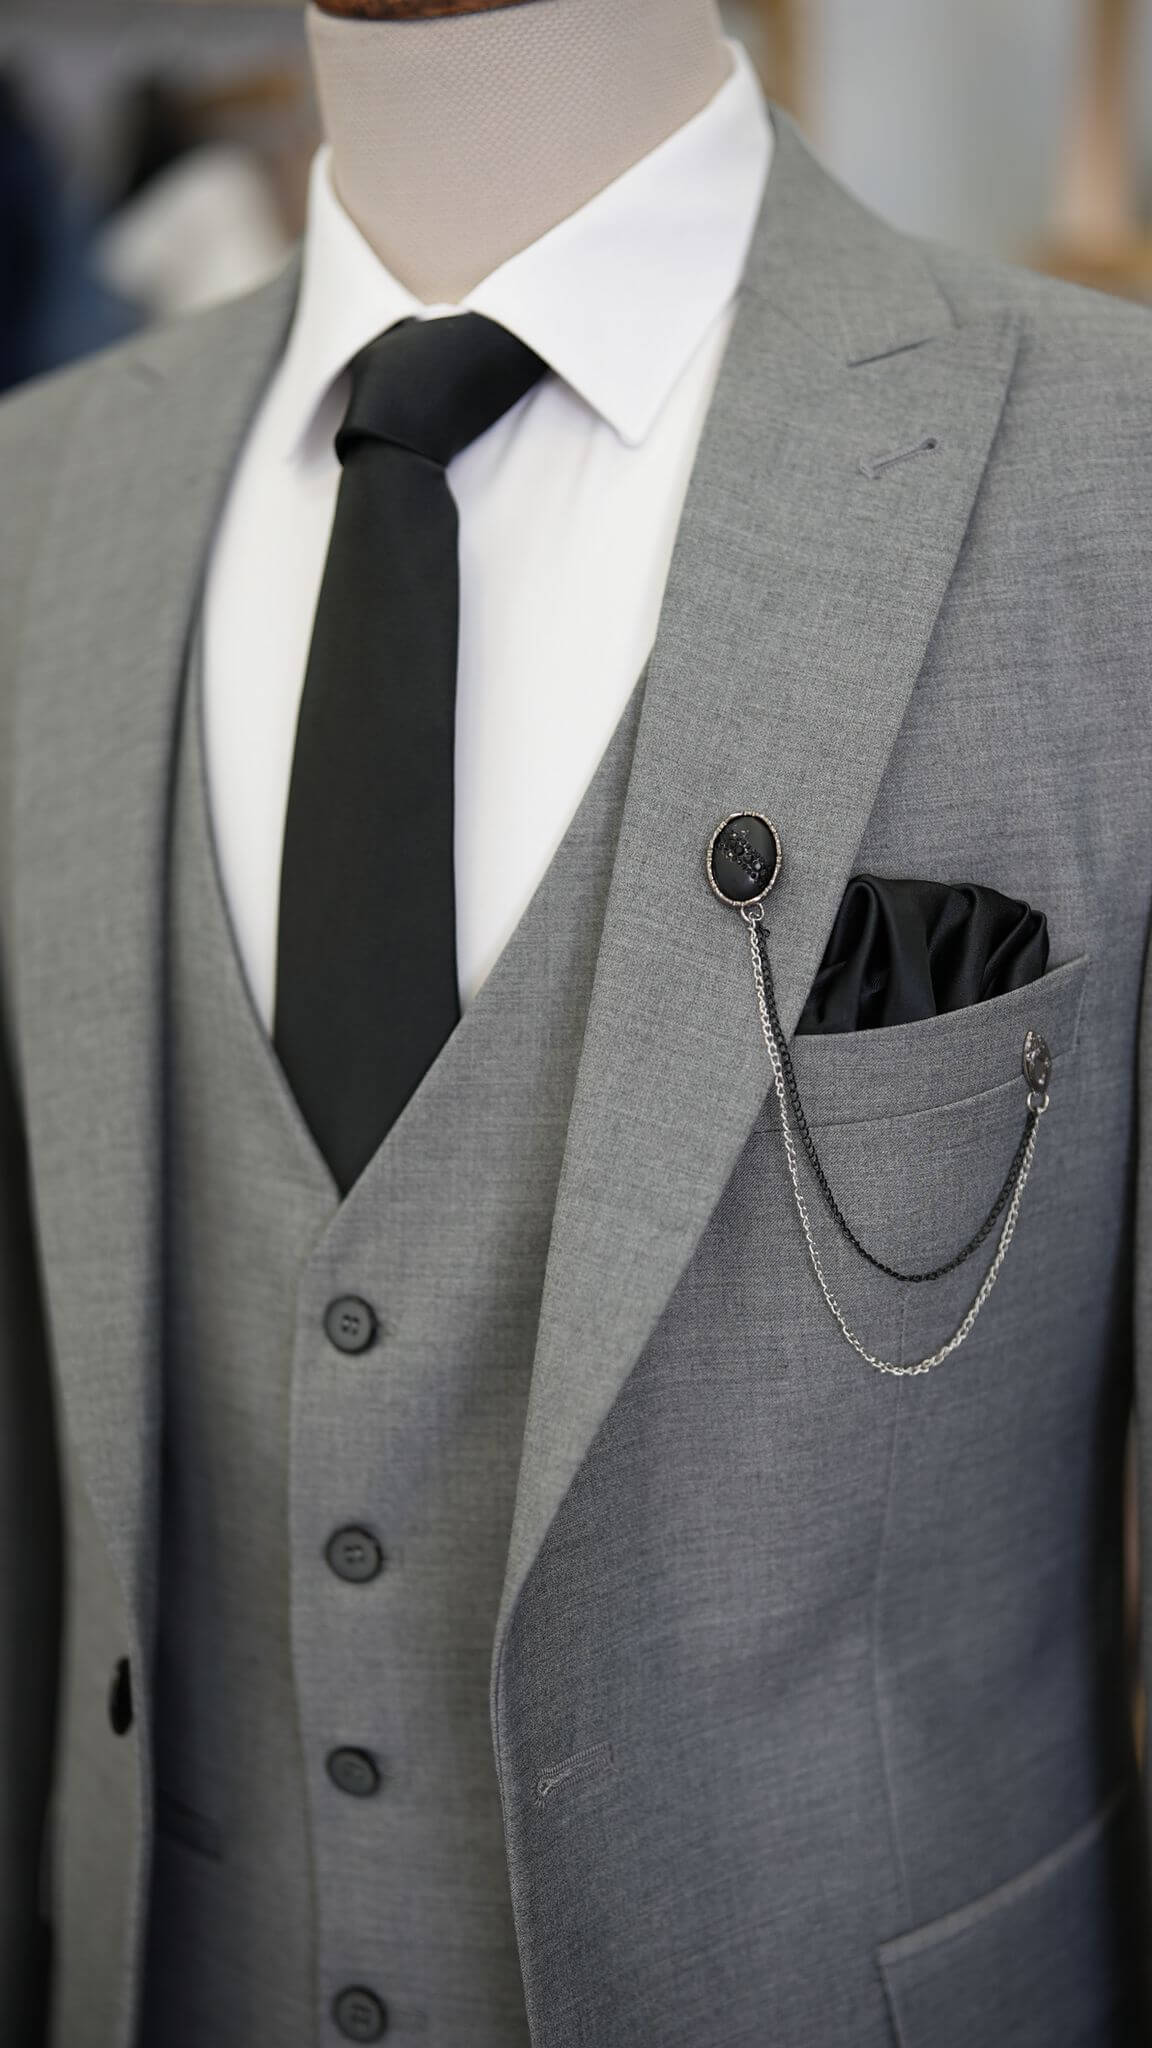 A Grey Suit on display.